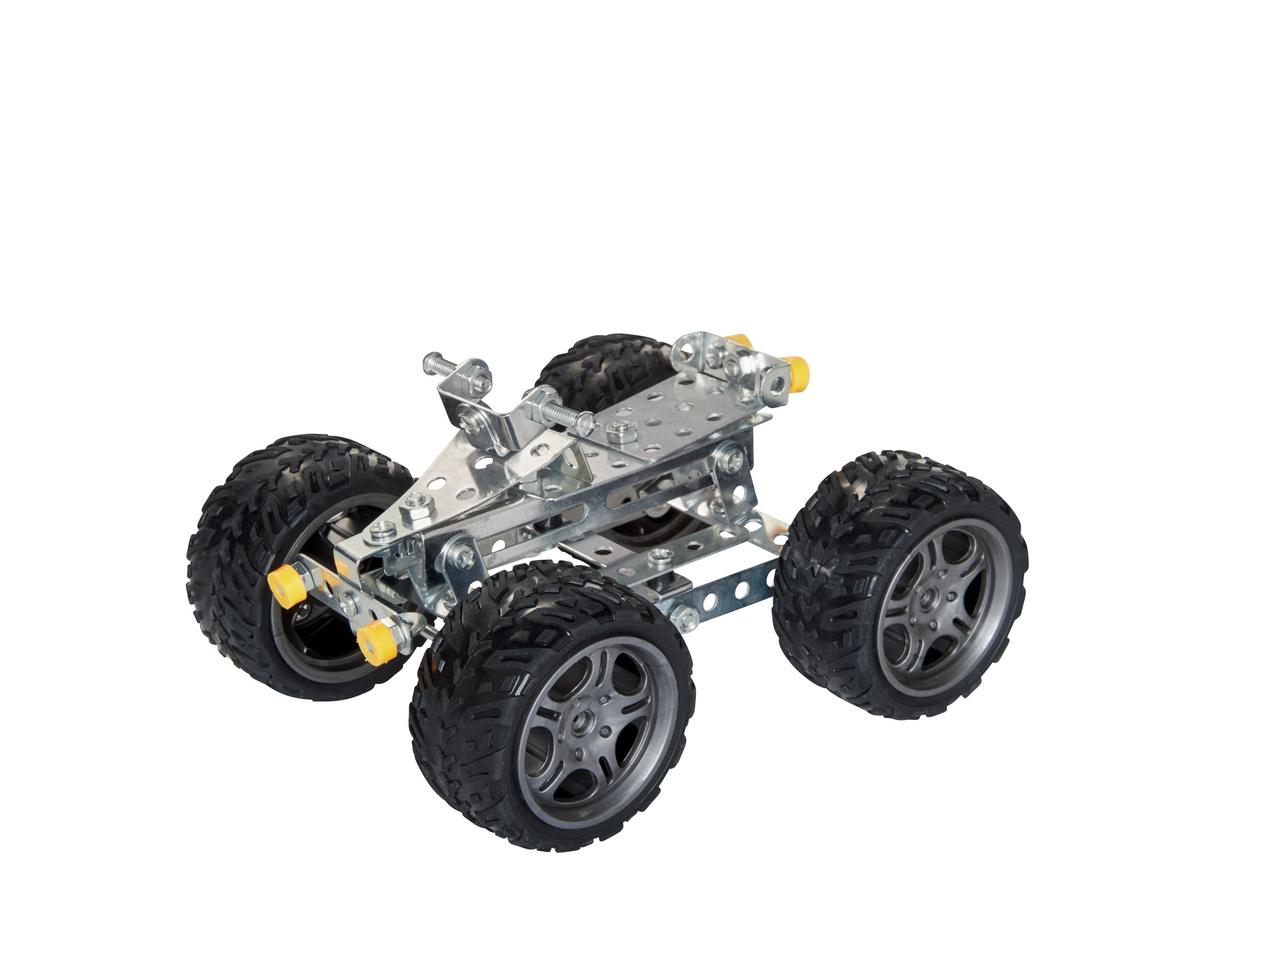 PLAYTIVE Build it Yourself Metal Toy Vehicles